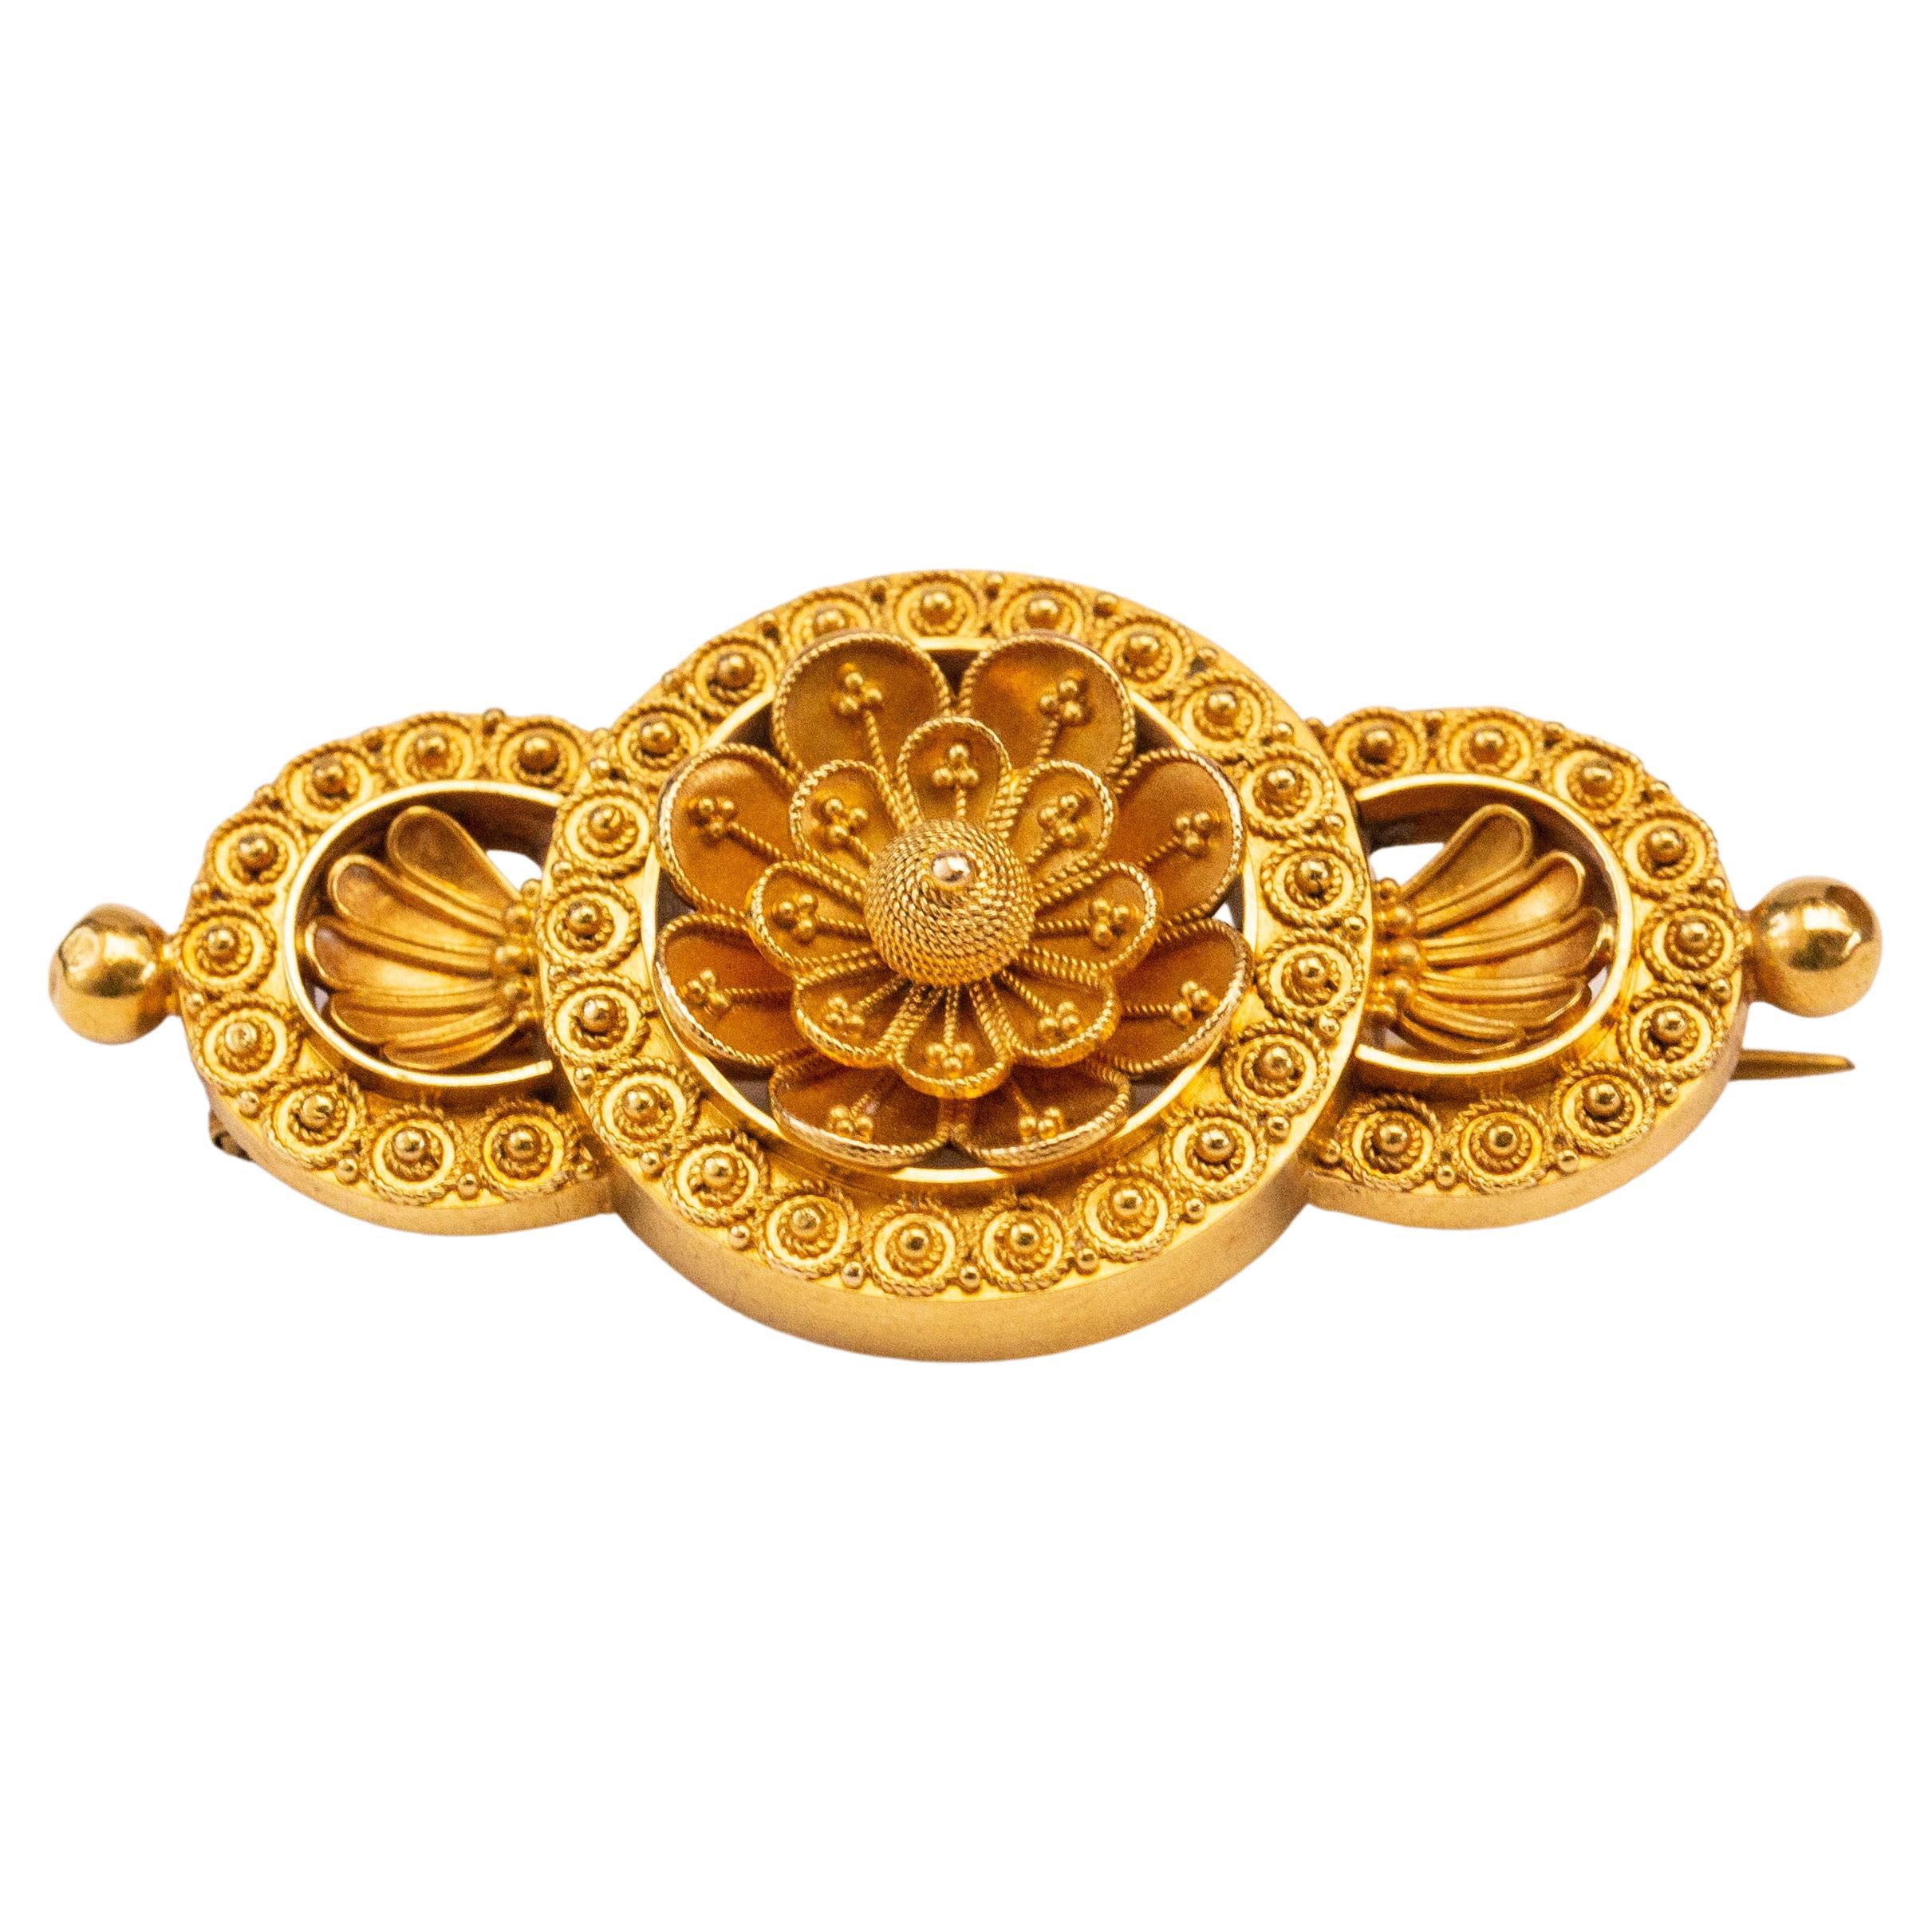 Victorian Etruscan Revival 15 Karat Yellow Gold Filigree Brooch For Sale